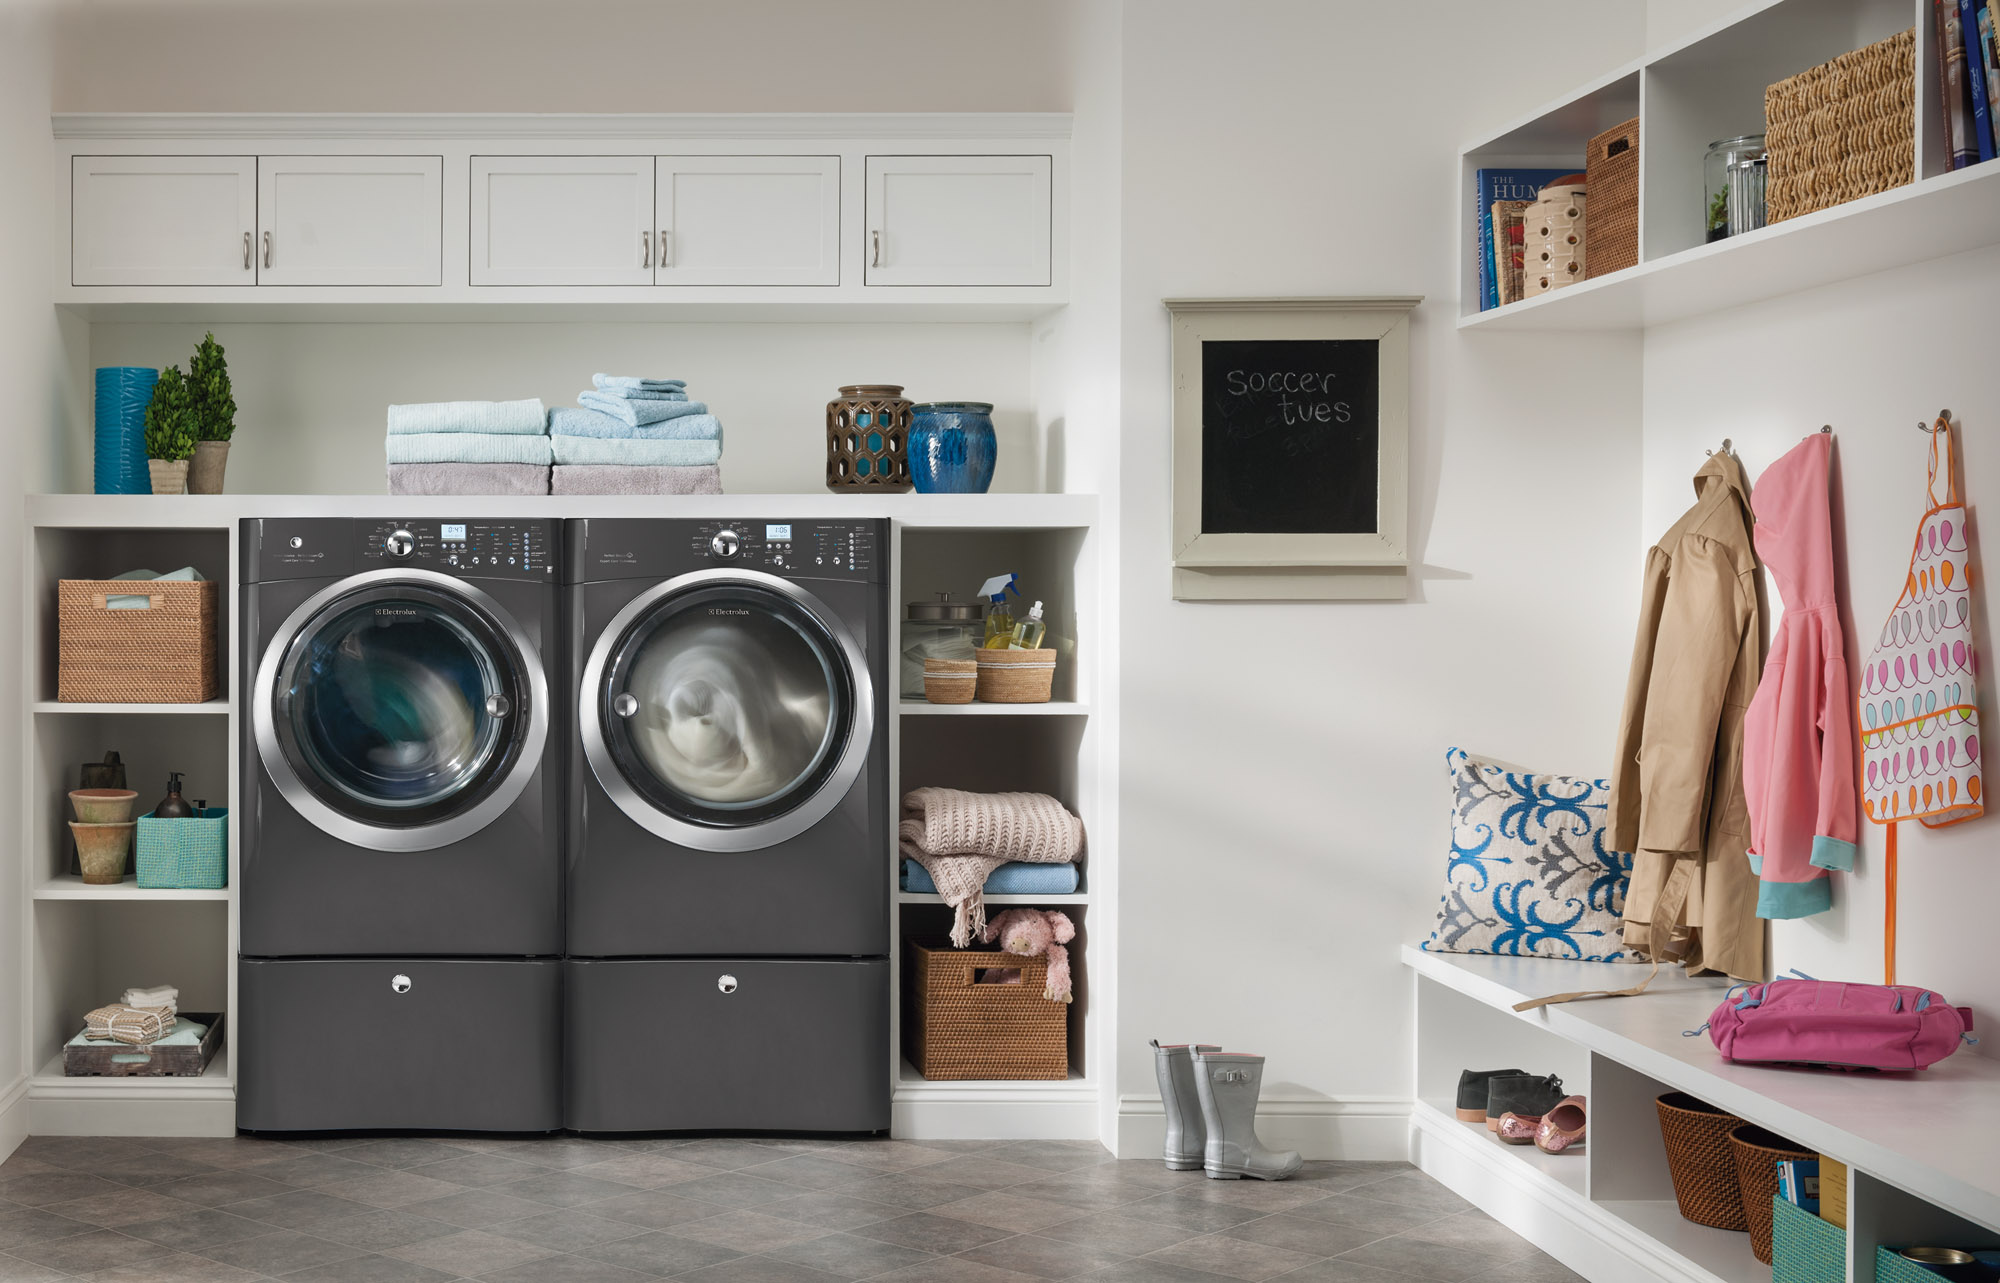 Transform Your Laundry Room into a Beautiful Escape